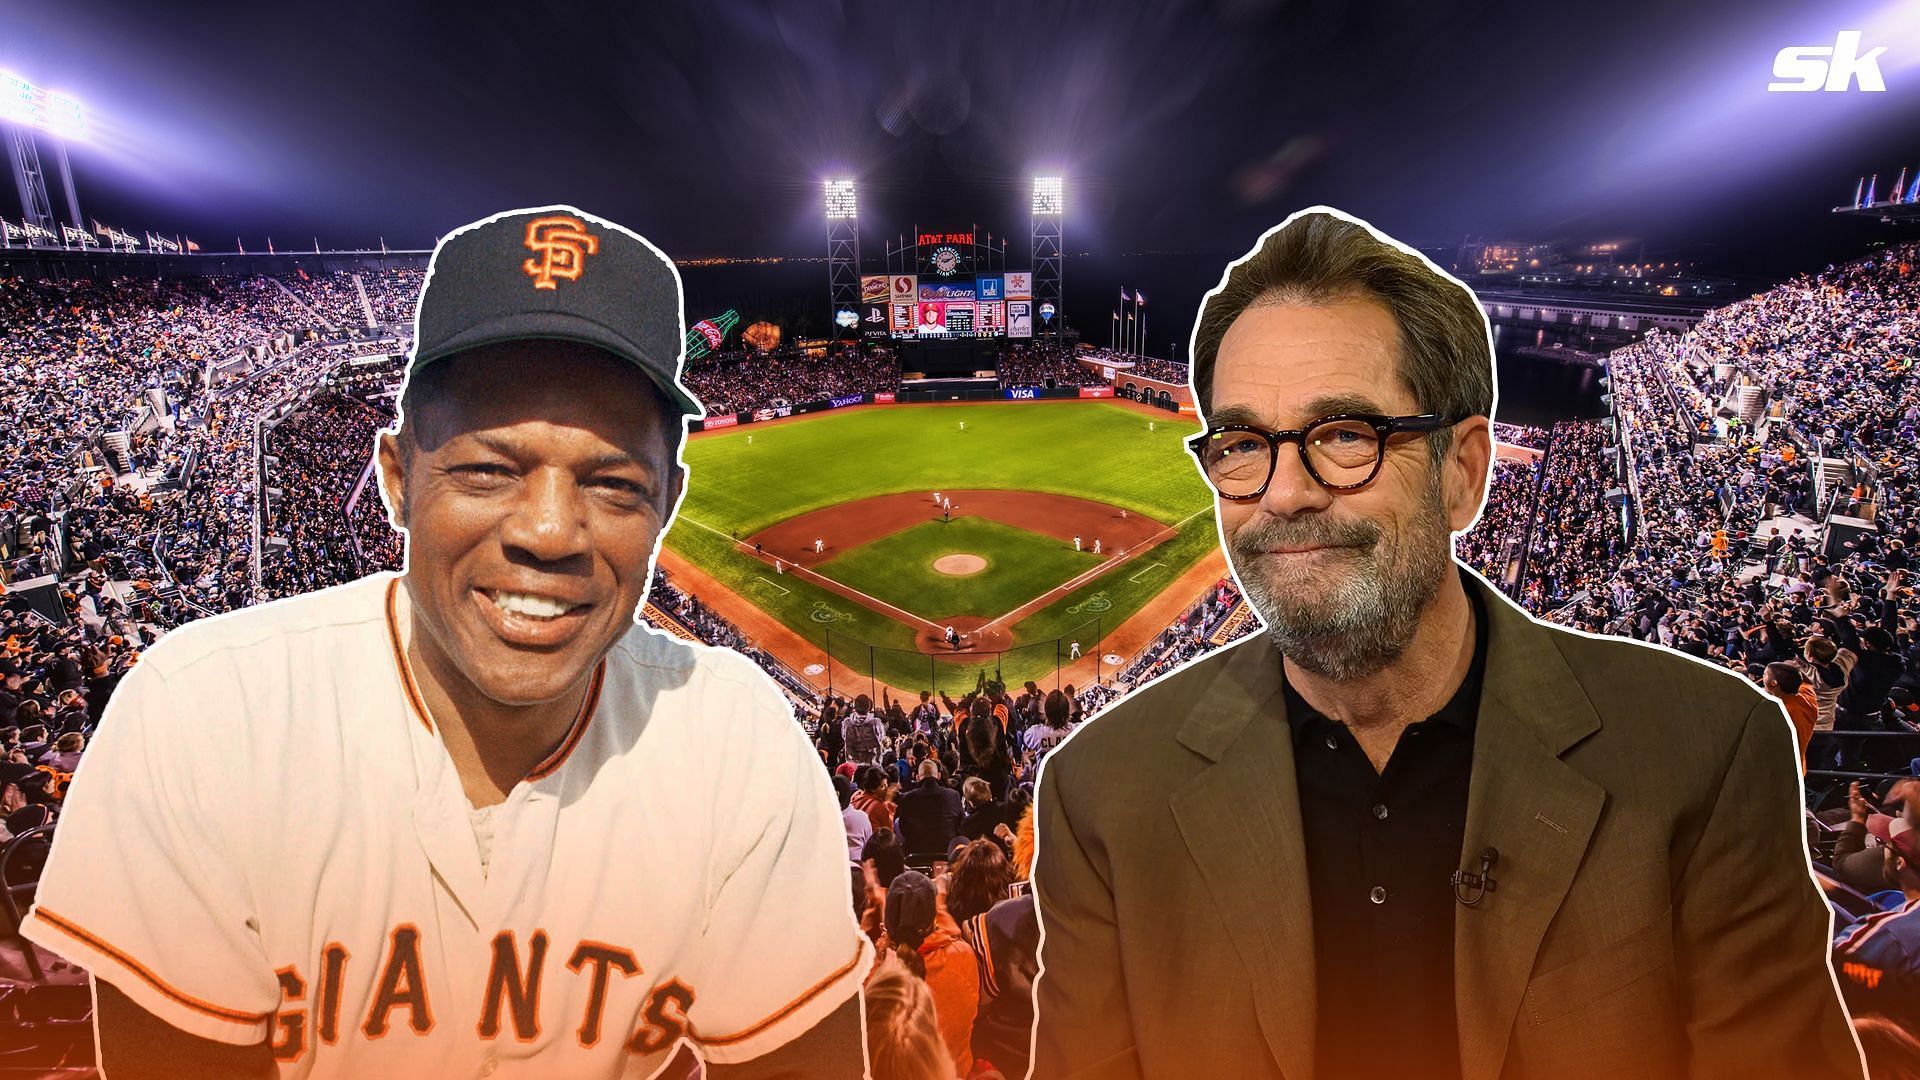 When Huey Lewis composed baseball stories to share memories of his childhood